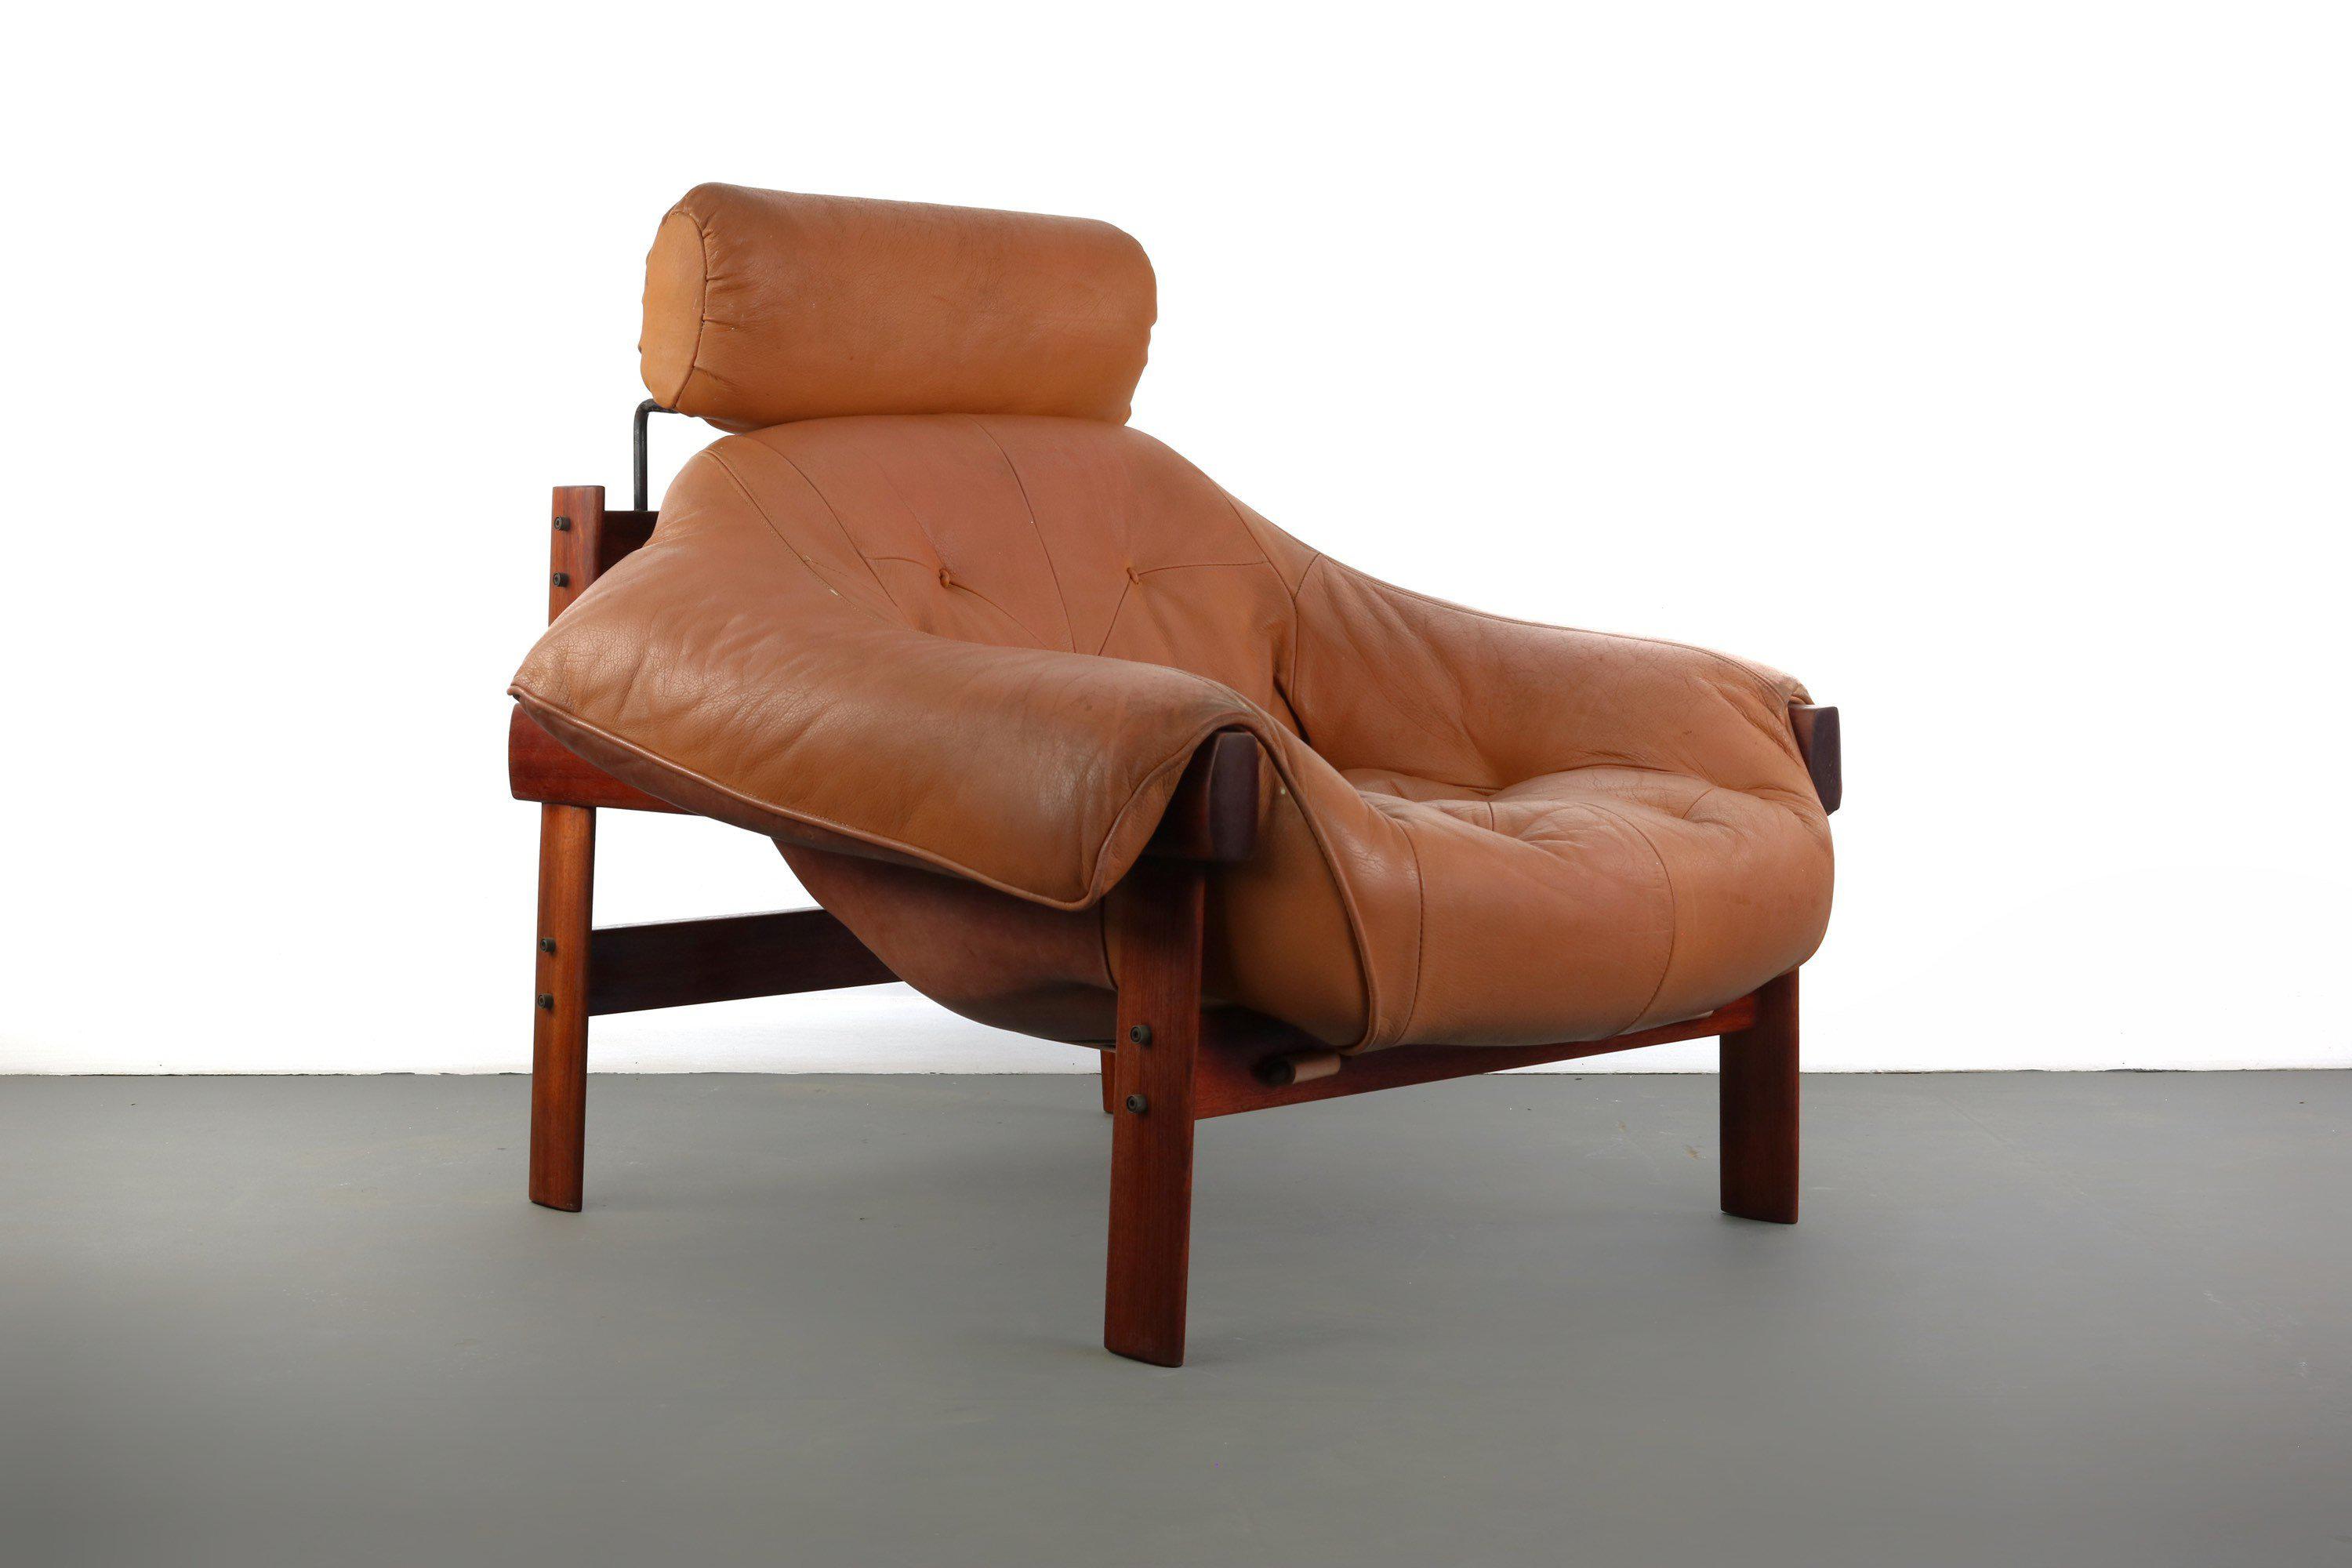 Percival Lafer Rosewood & Leather MP-163 Earth Scoop Chair with Ottoman